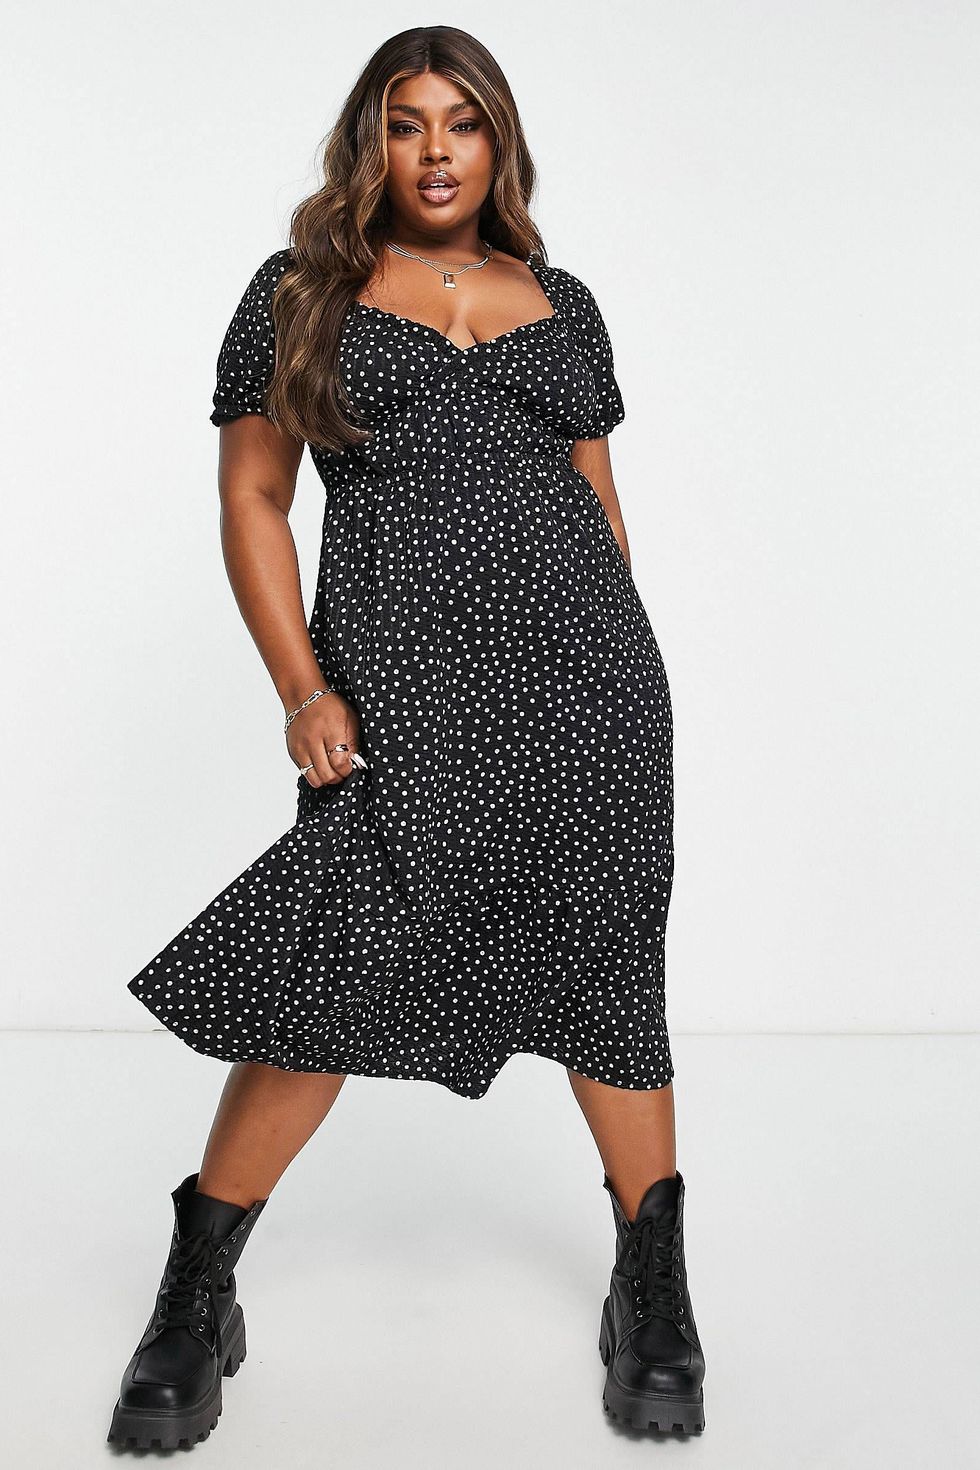 Plus Size Clothing - Dresses & More, Reformation